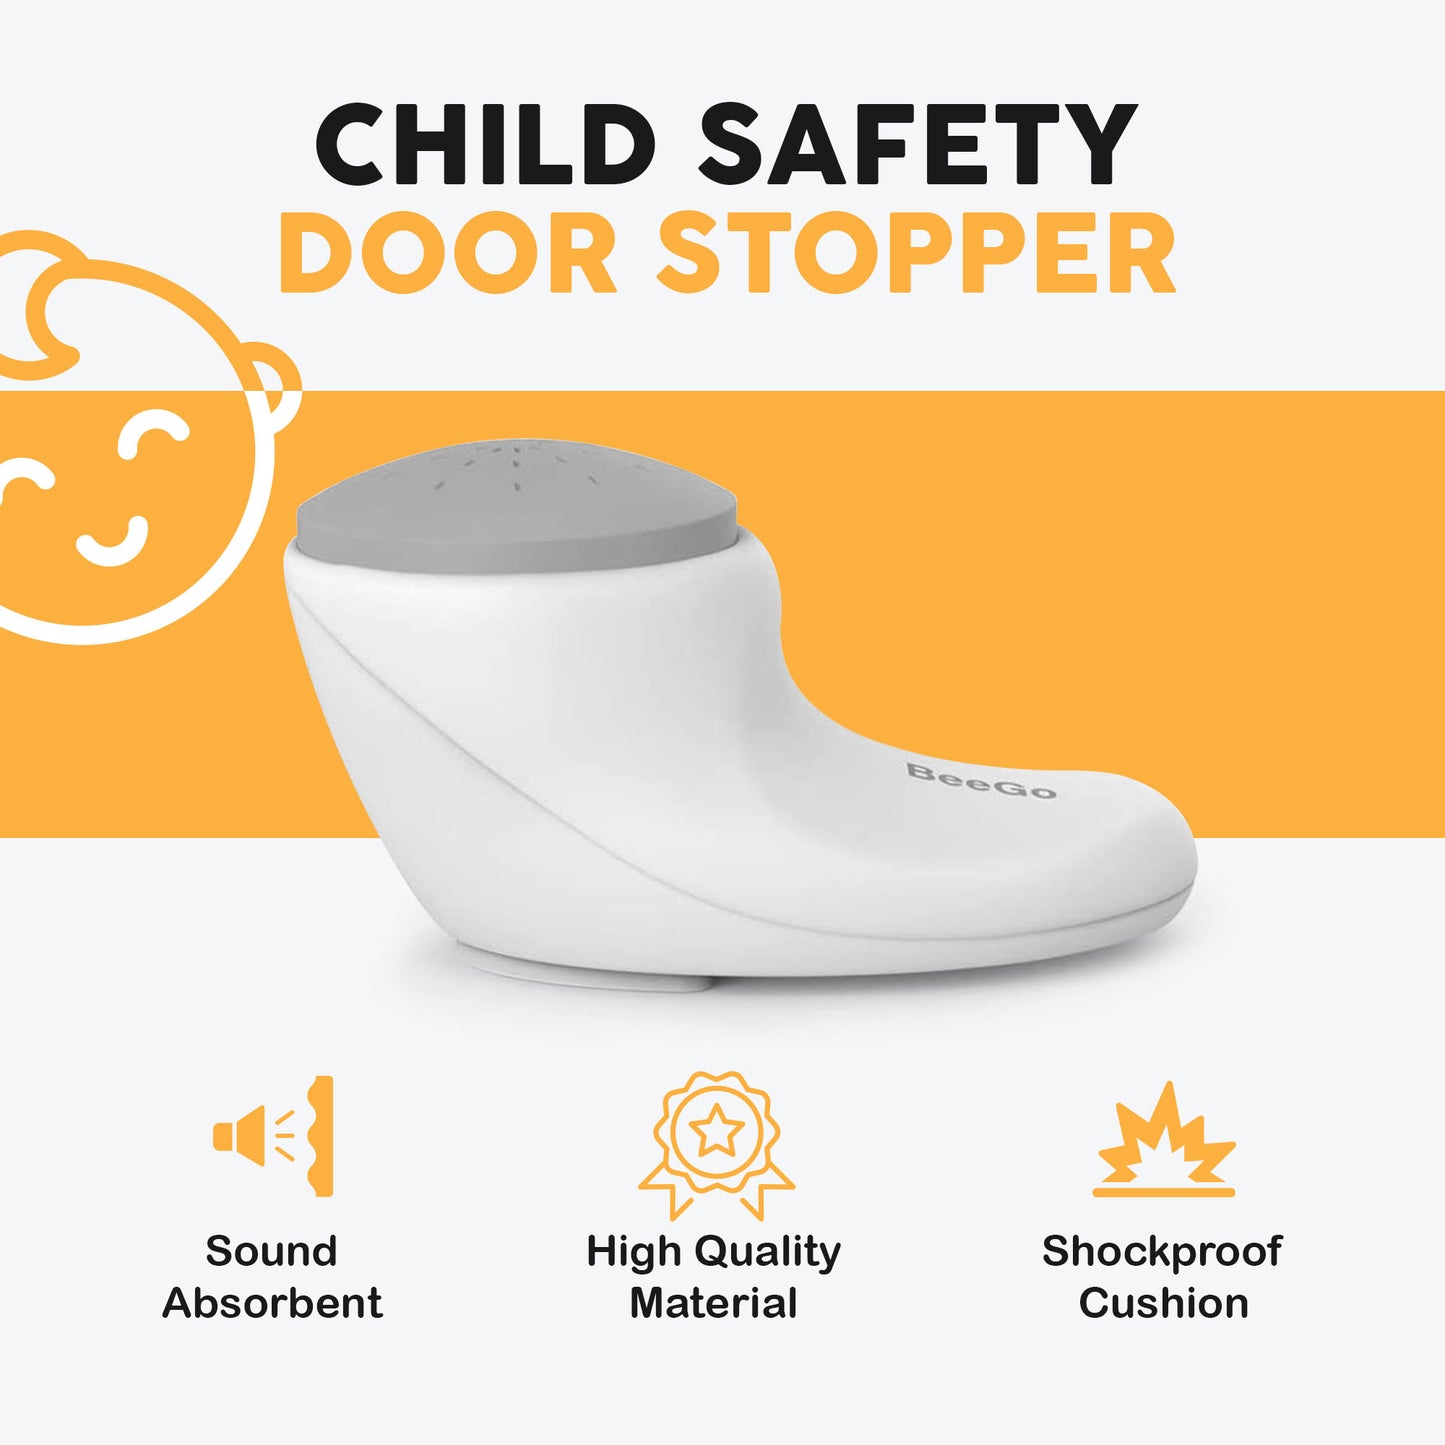 Beego Child Safety Door Stoppers - Beego Safety